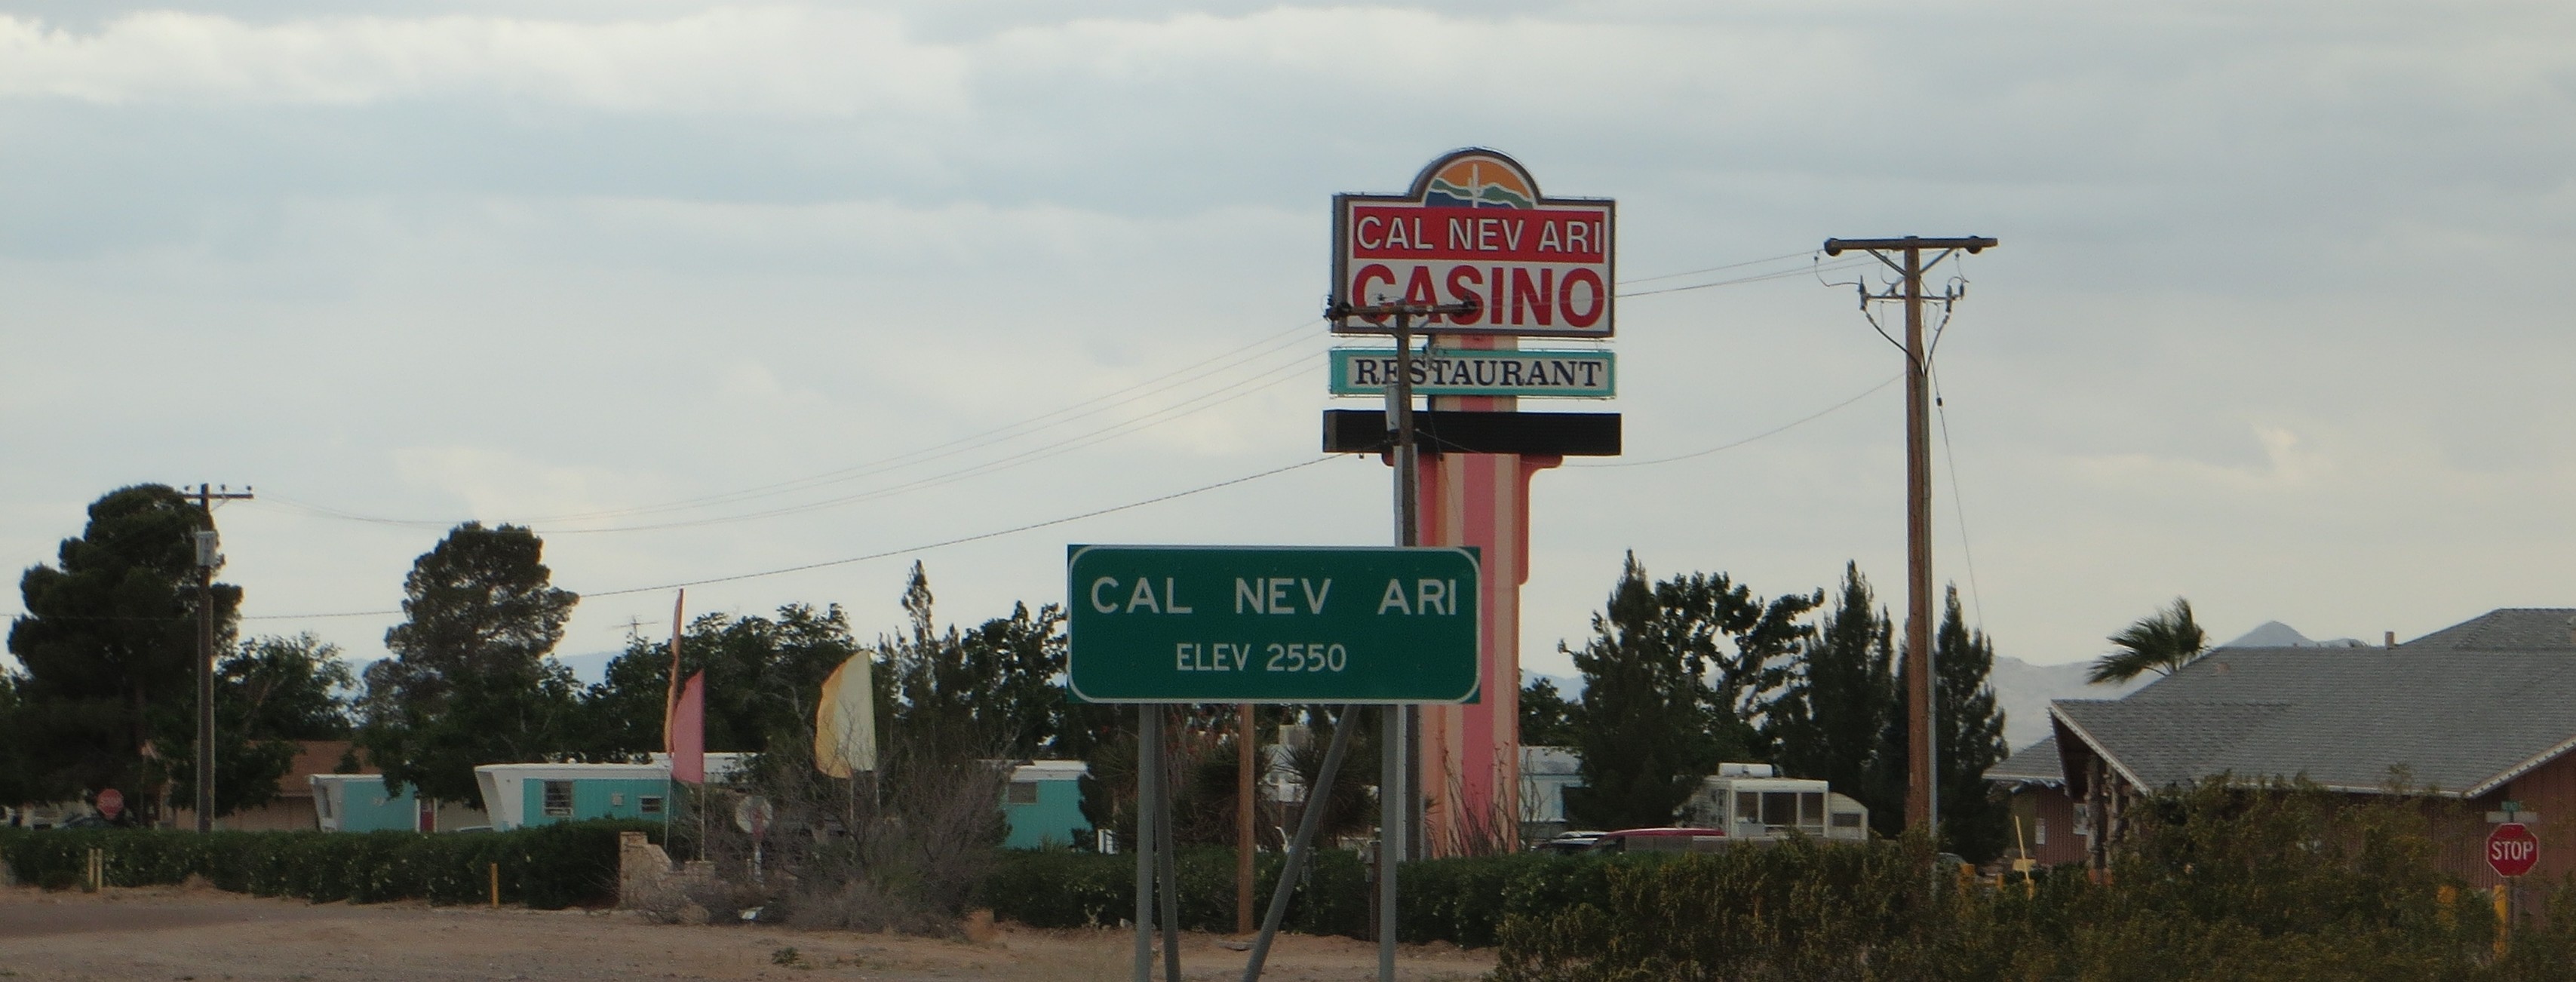 cal-nev-ari-nevada-town-with-350-people-can-be-yours-for-8-million